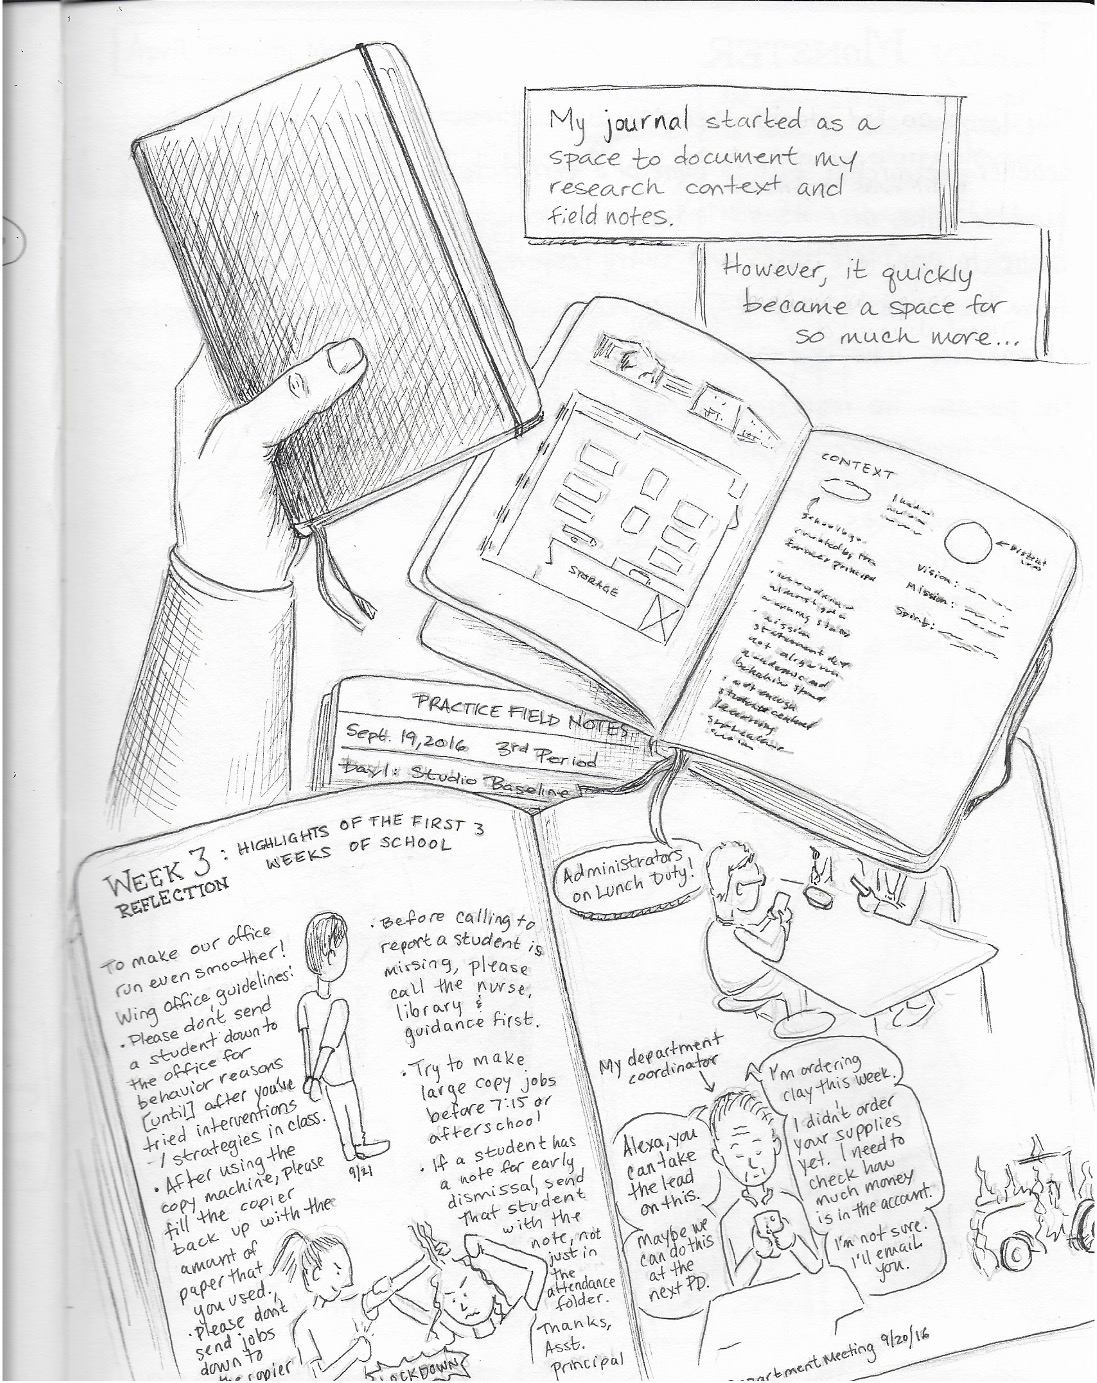 Page from Alexa Kulinski's diary which includes field notes and reflections